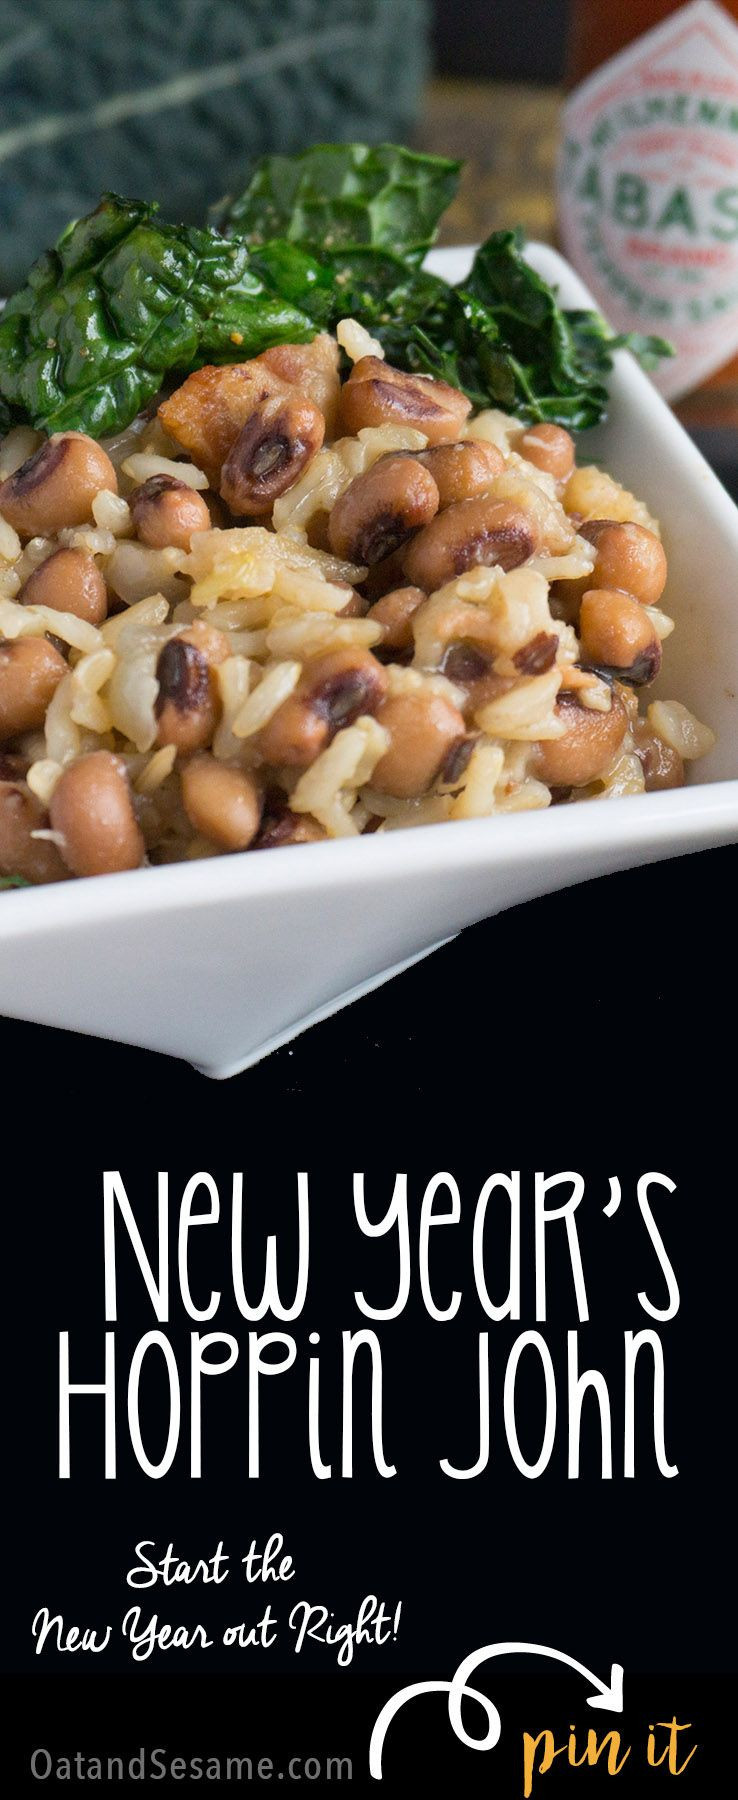 Vegetarian New Year Eve Recipes
 Top 25 Ve arian New Year Eve Recipes Best Round Up